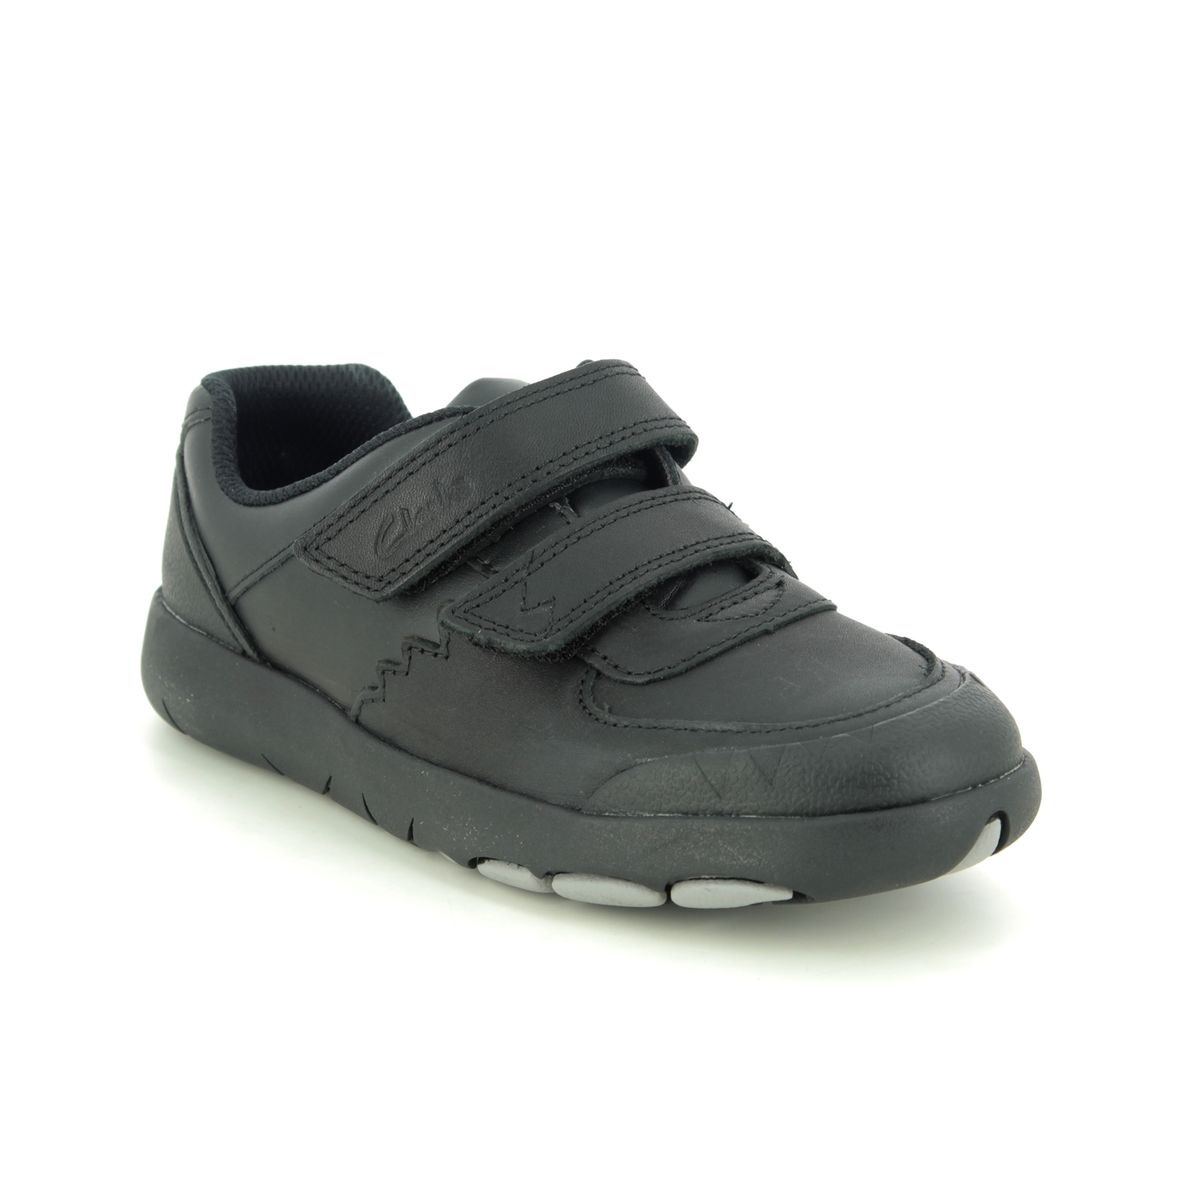 Clarks Rex Pace K Black leather Kids Boys Shoes 4704-47G in a Plain Leather in Size 2.5